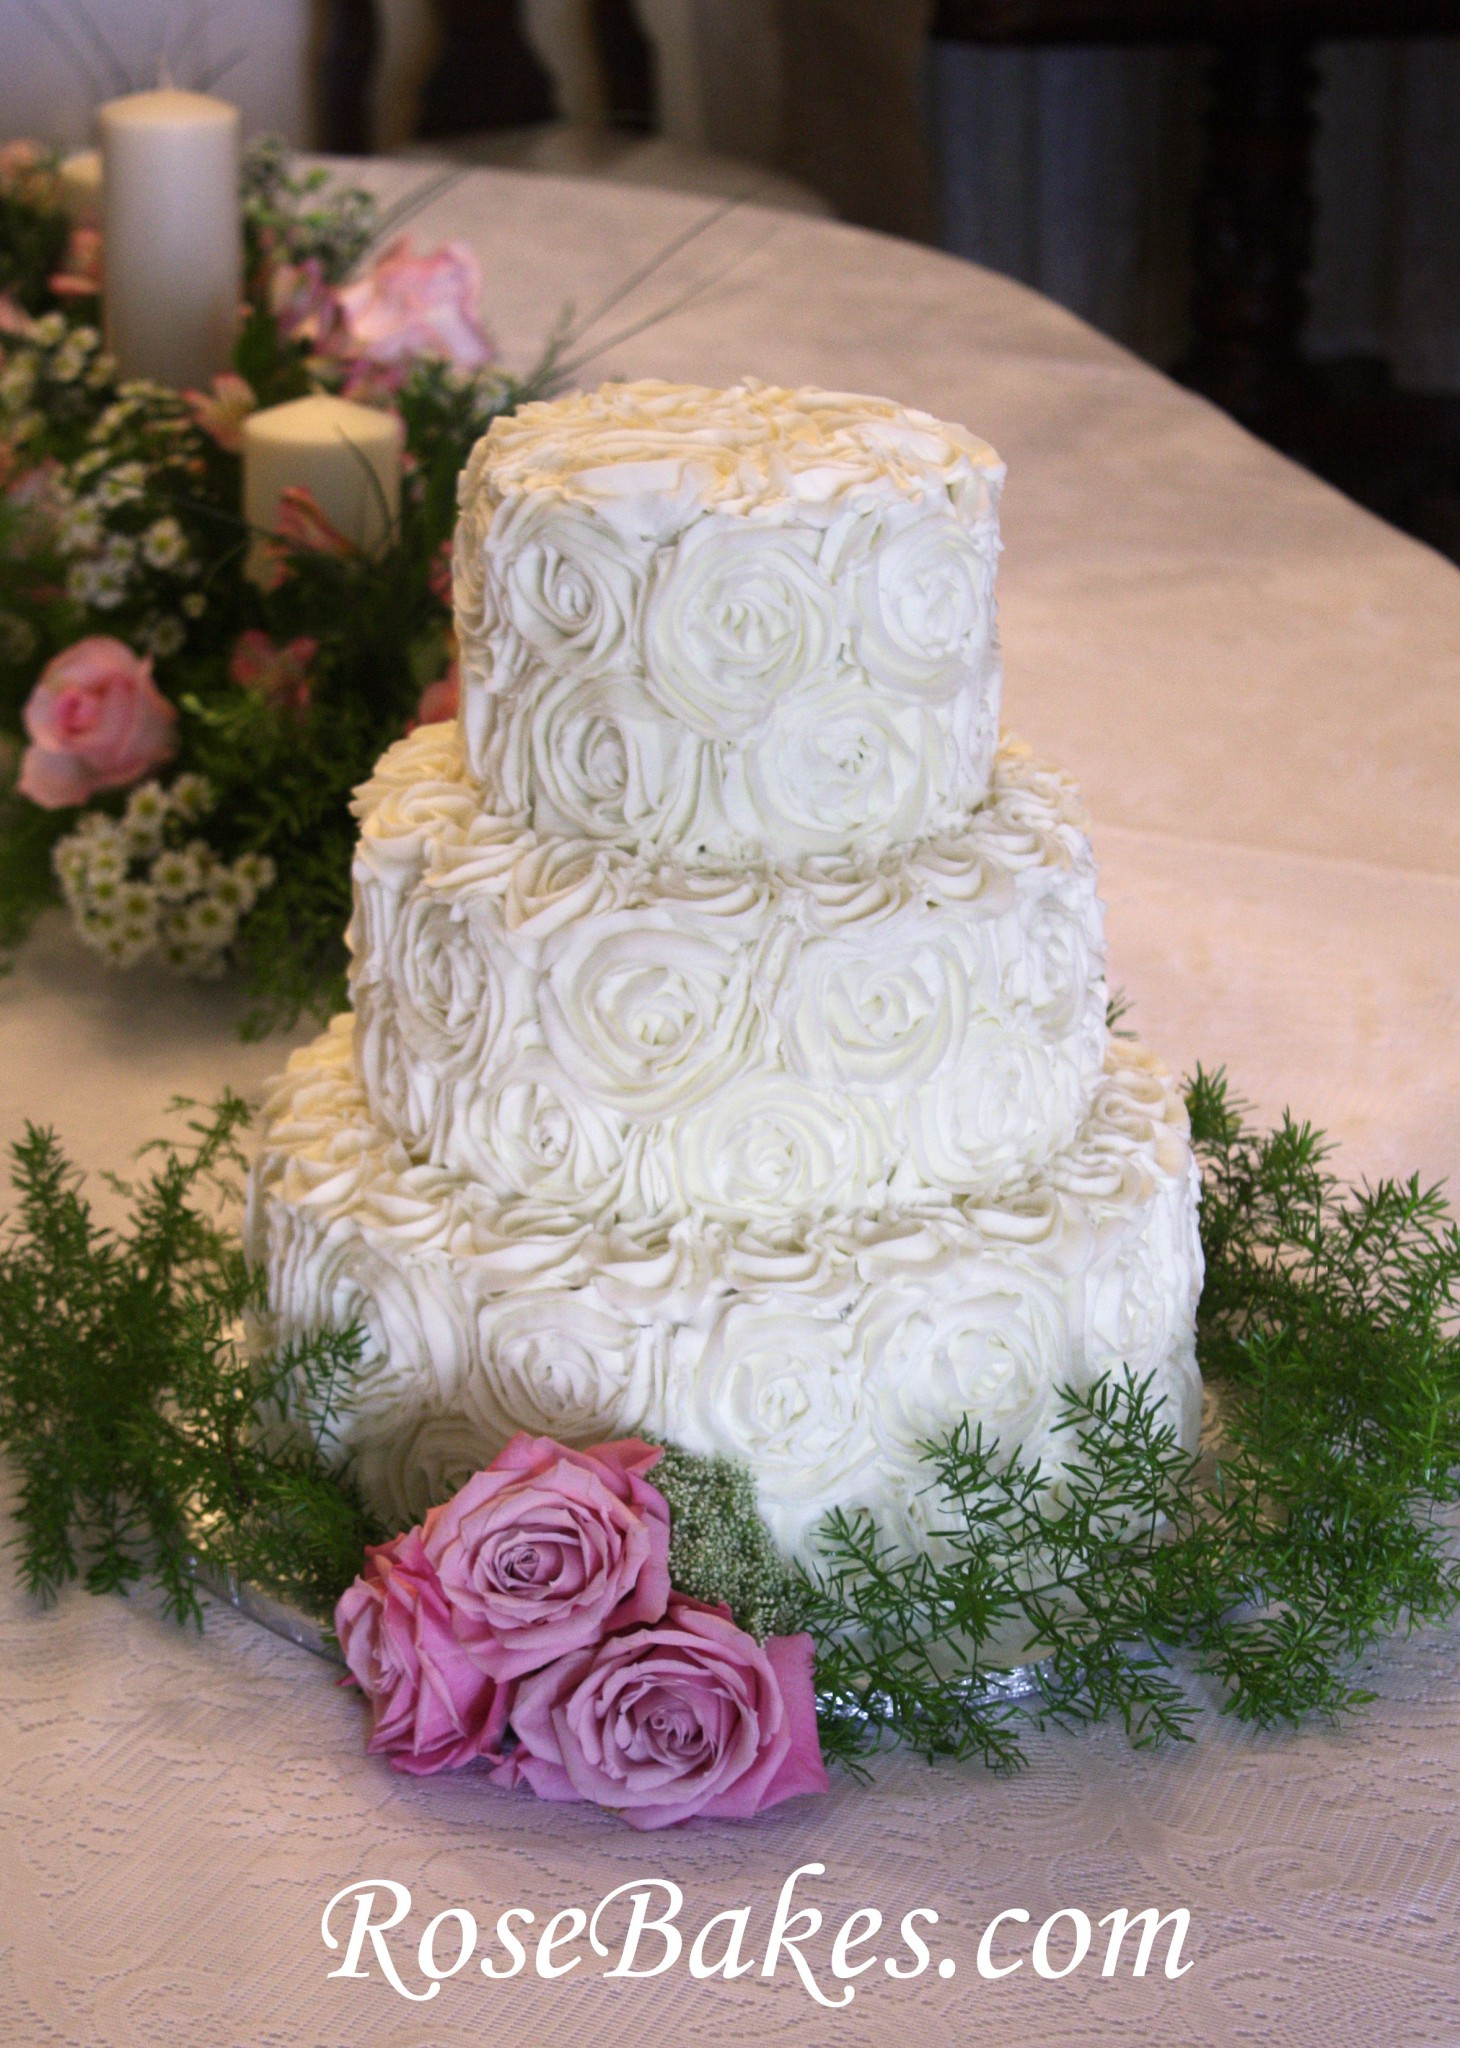 Wedding Cakes With Roses
 Buttercream Roses Wedding Cake with Pink Roses